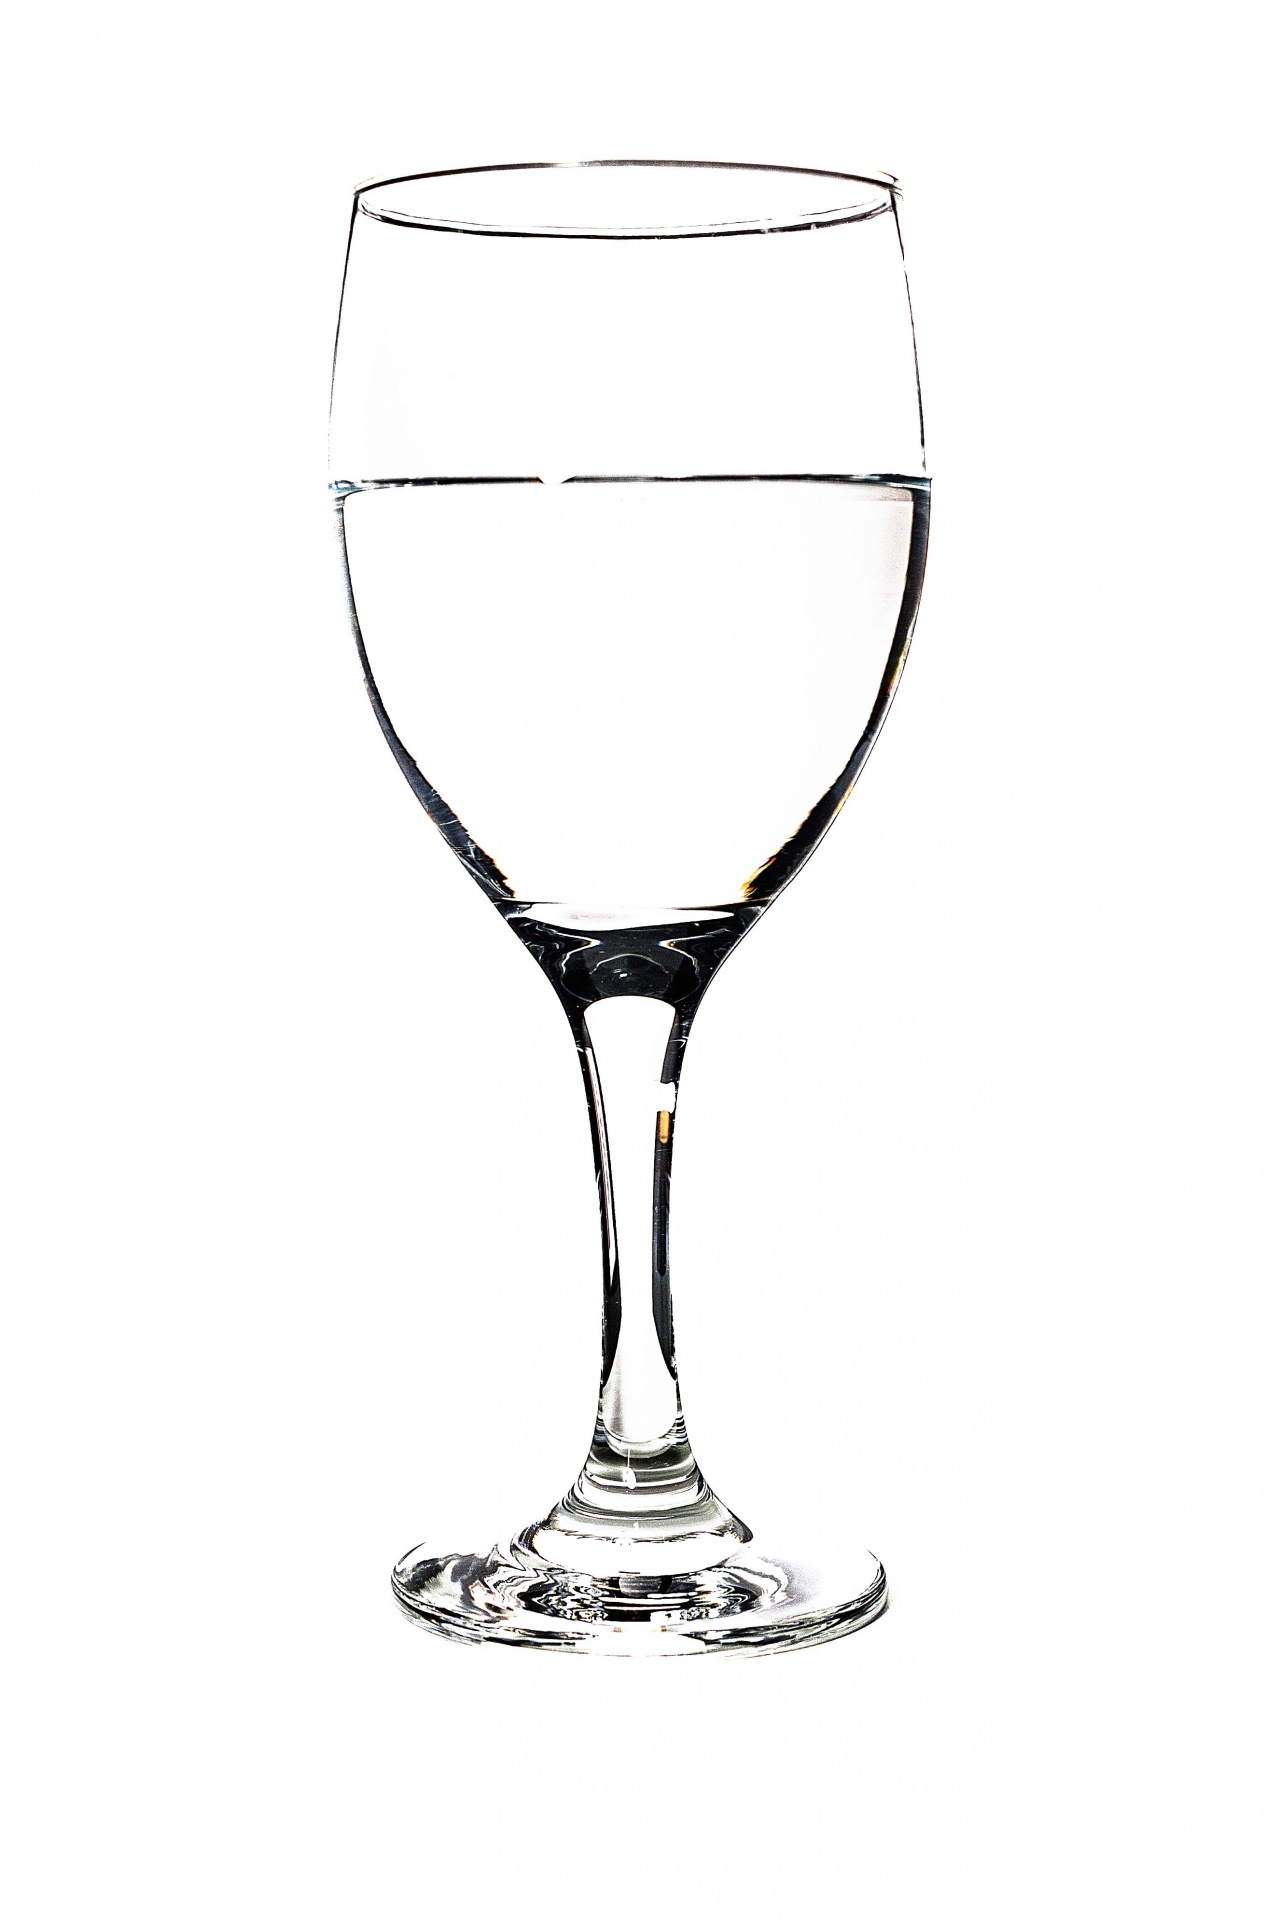 https://storage.needpix.com/rsynced_images/glass-with-water-white-background.jpg